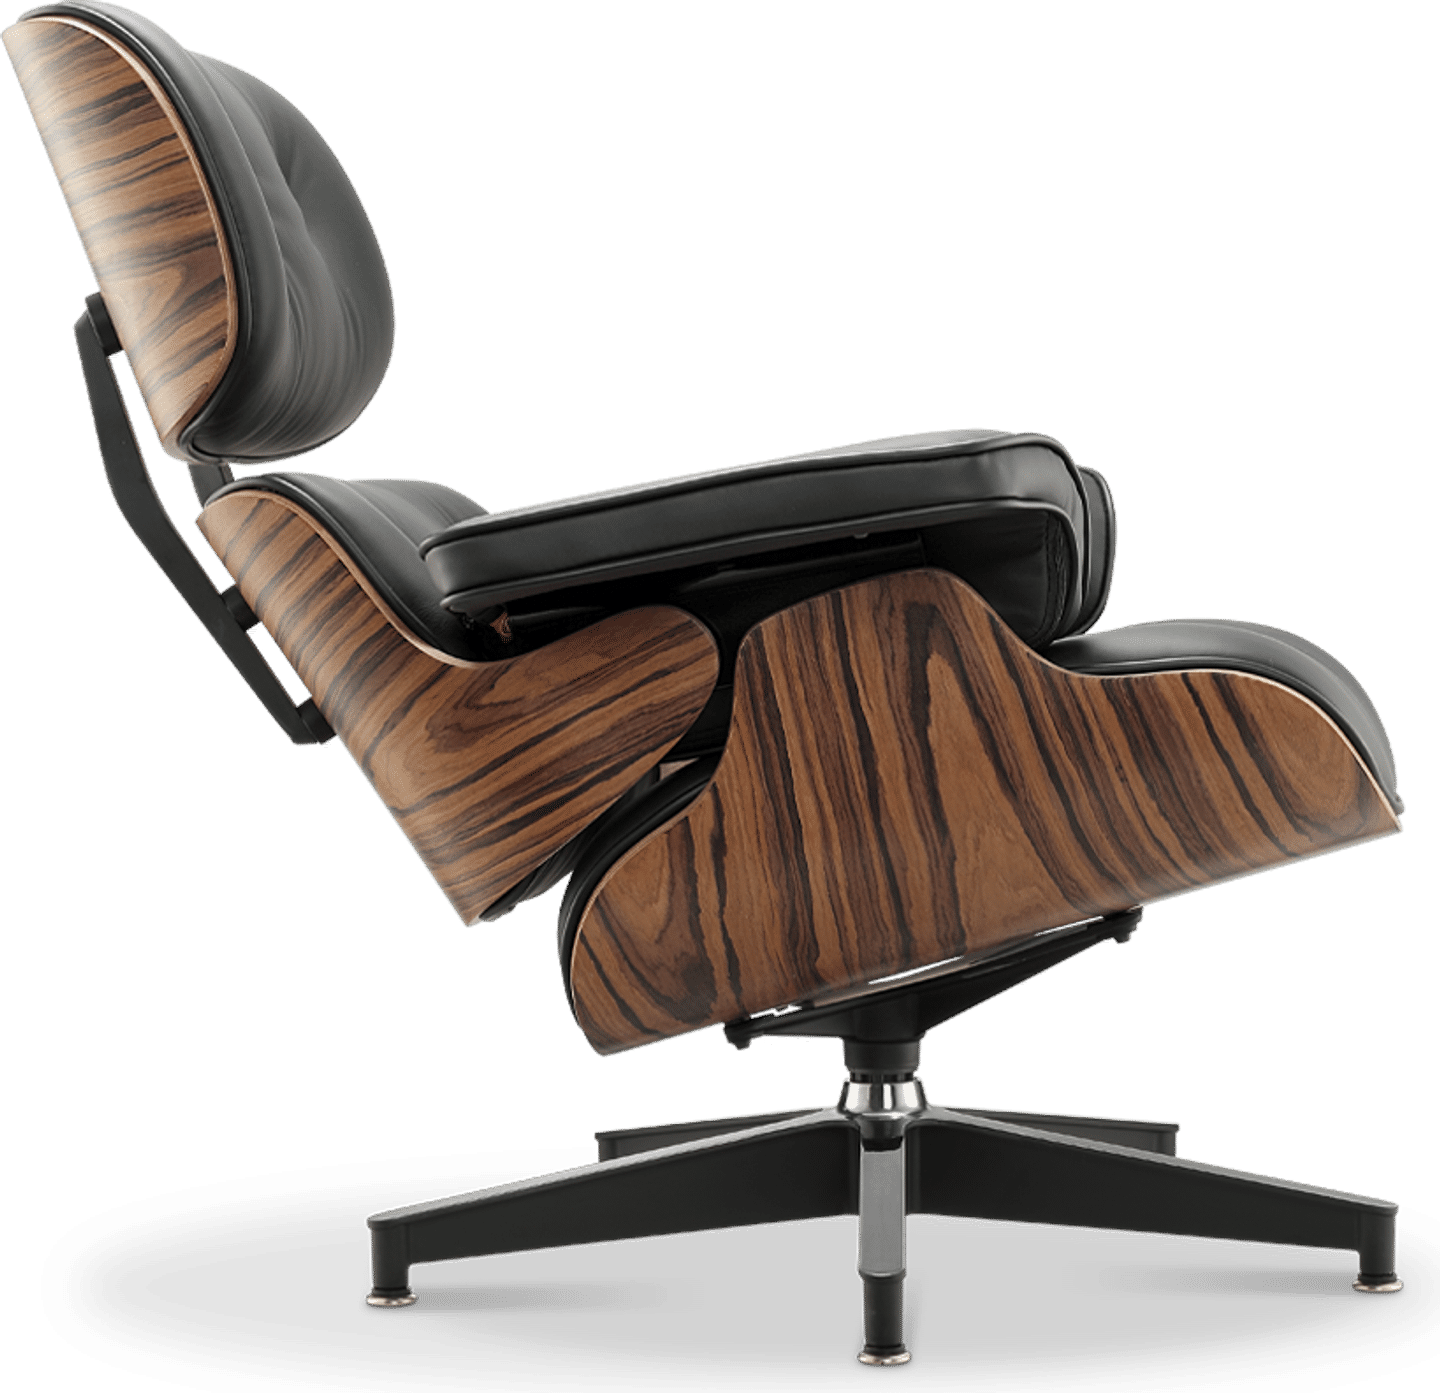 Eames Style Lounge Chair H Miller Version Premium Leather/Black/Rosewood image.